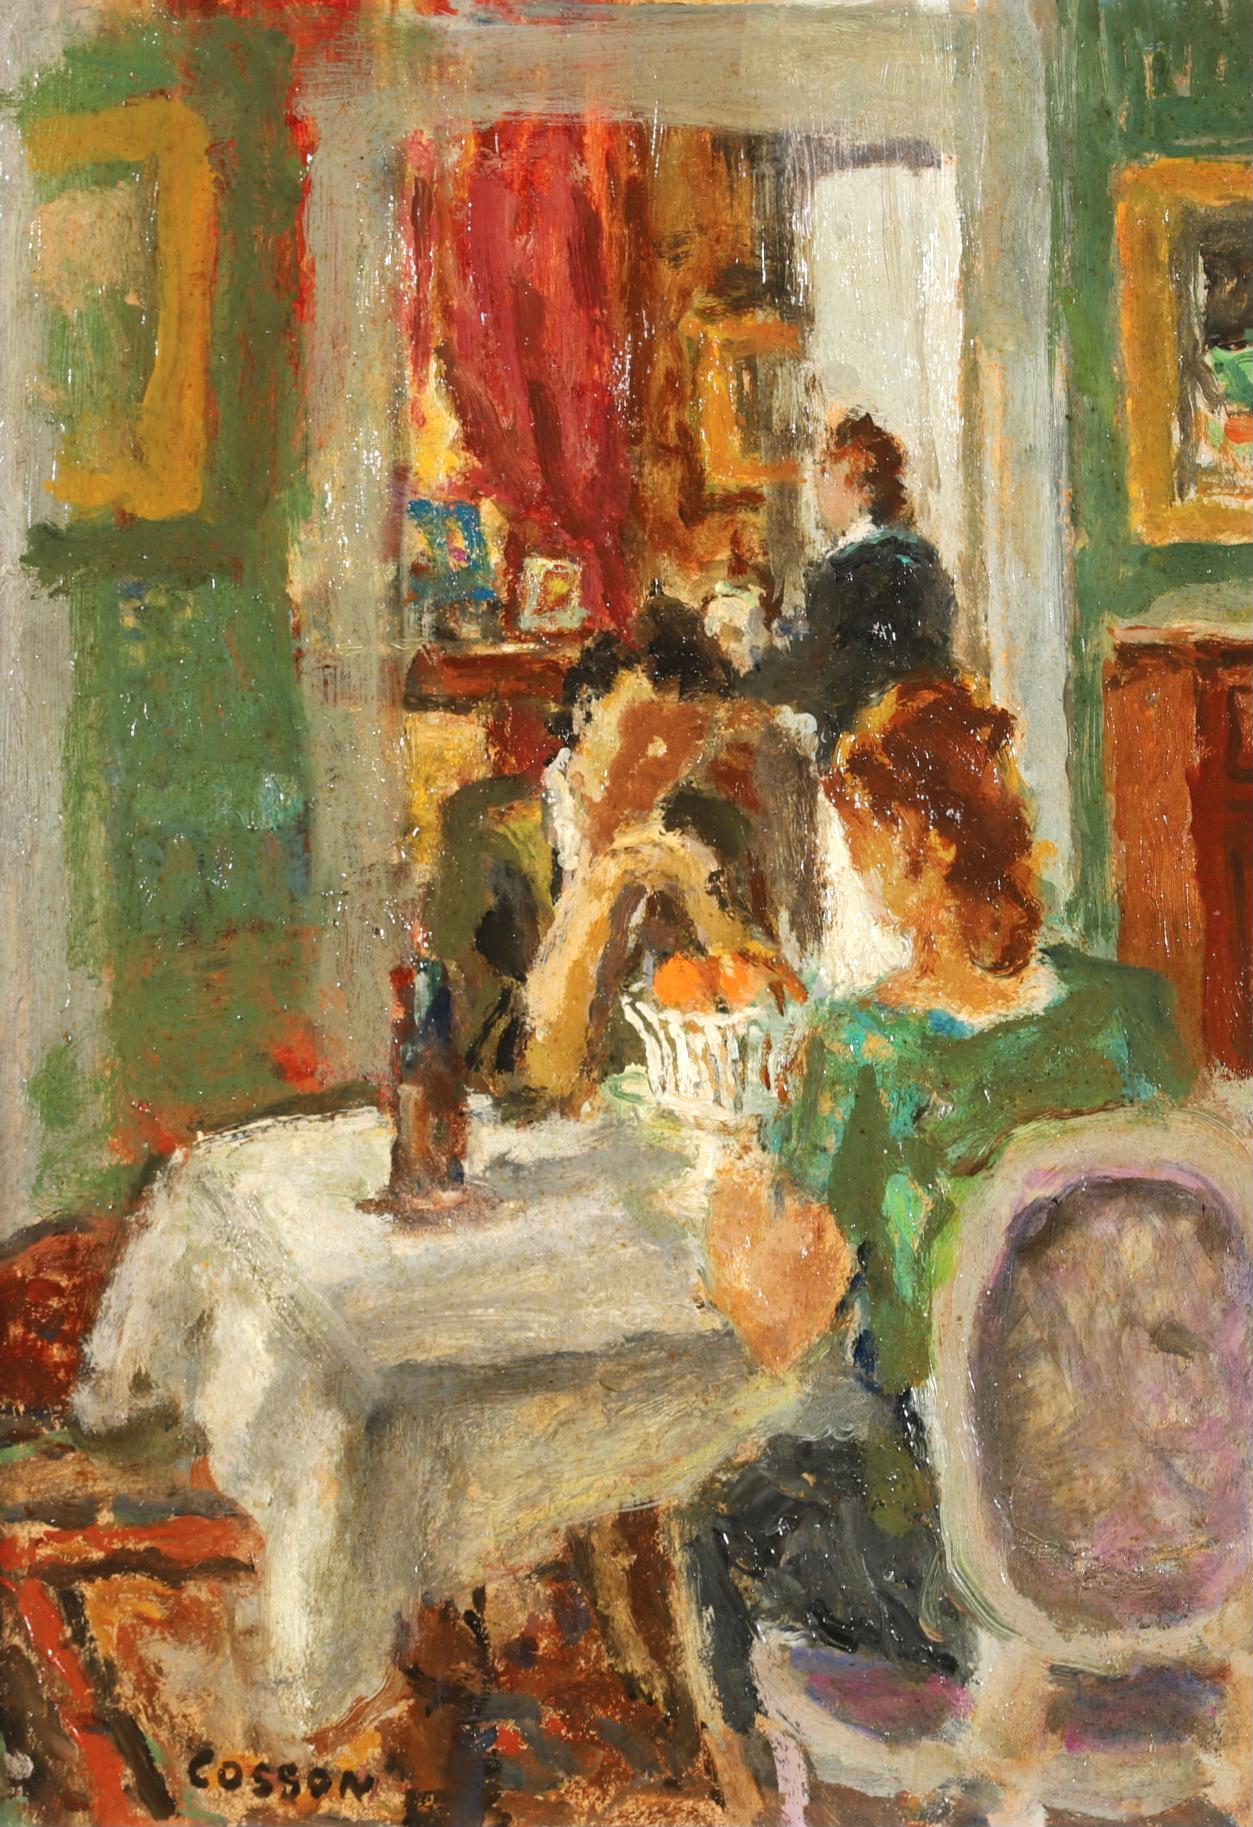 Signed post impressionist figures in interior oil on artist's board circa 1950 by French painter Jean-Louis-Marcel Cosson. The work depicts two women seated at a table deep in conversation while the maid prepares drinks in the